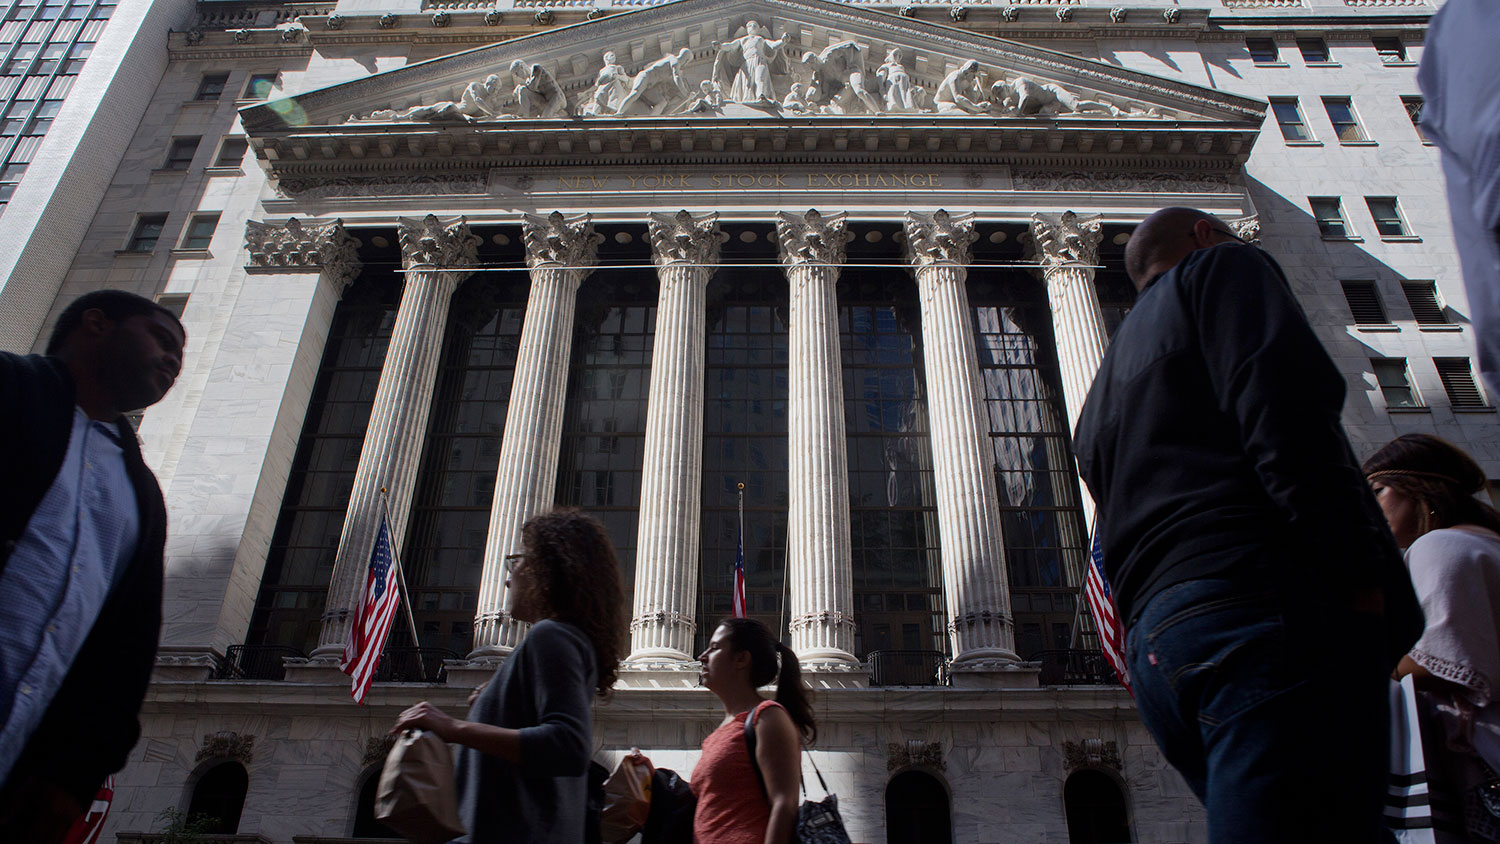 Pedestrians pass by the New York Stock Exchange in New York on Sept. 26, 2014.
